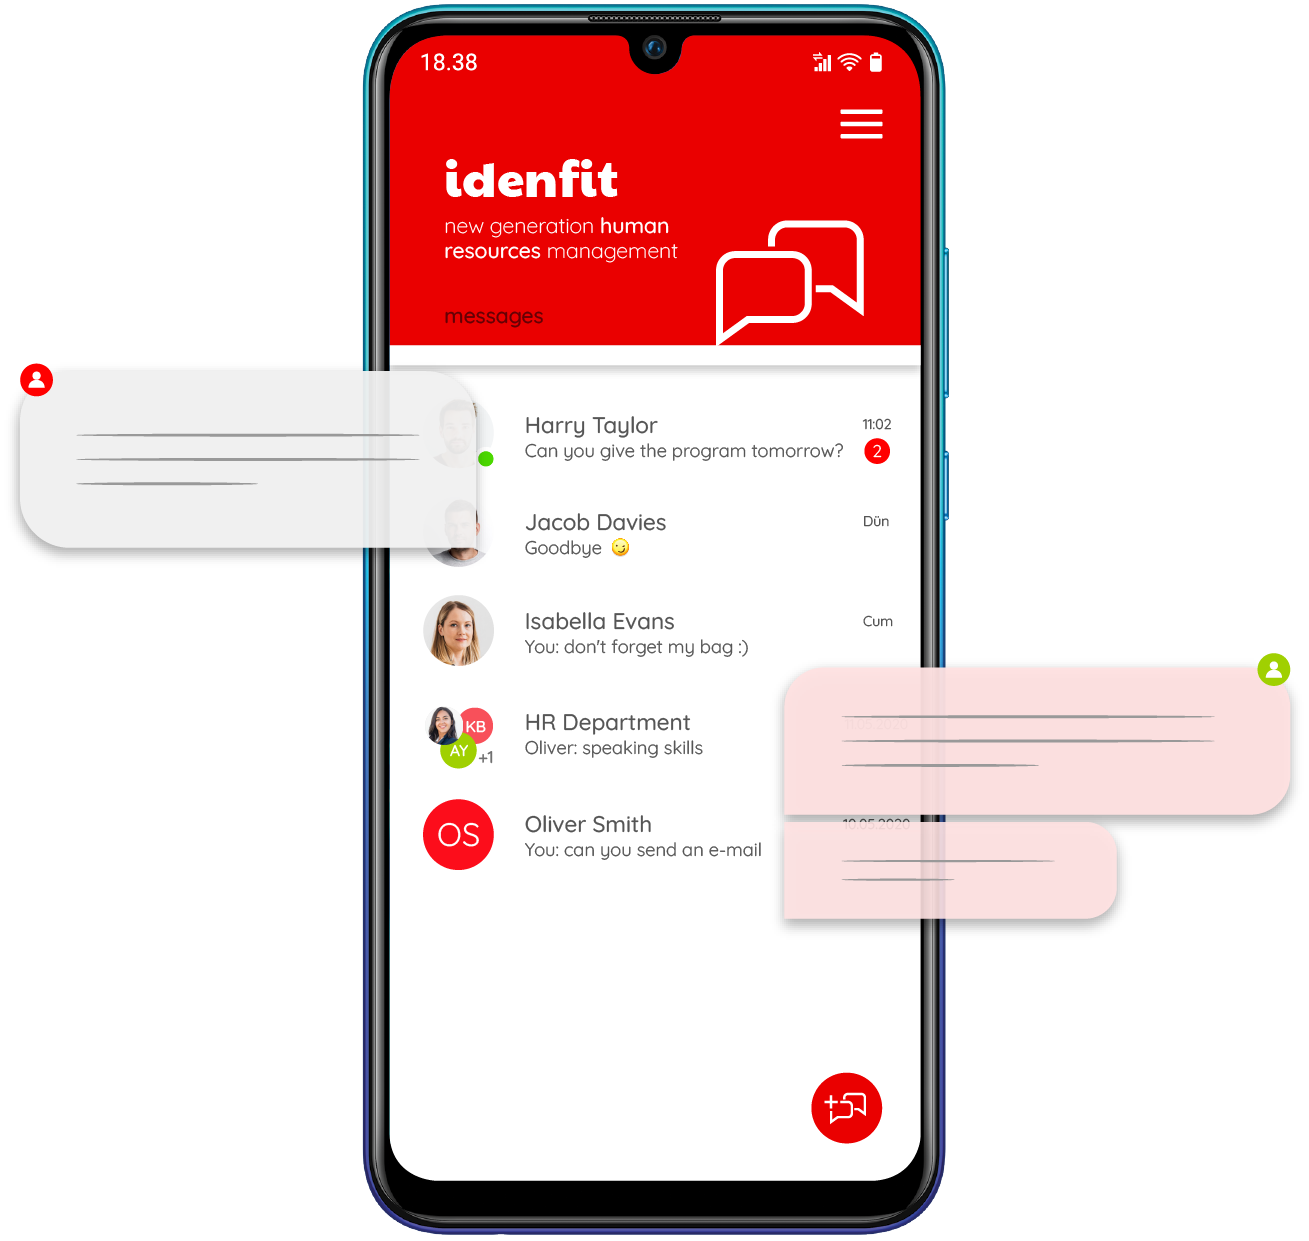 Idenfit message module allows users to communicate effectively within organization by sending messages as a group or individually.